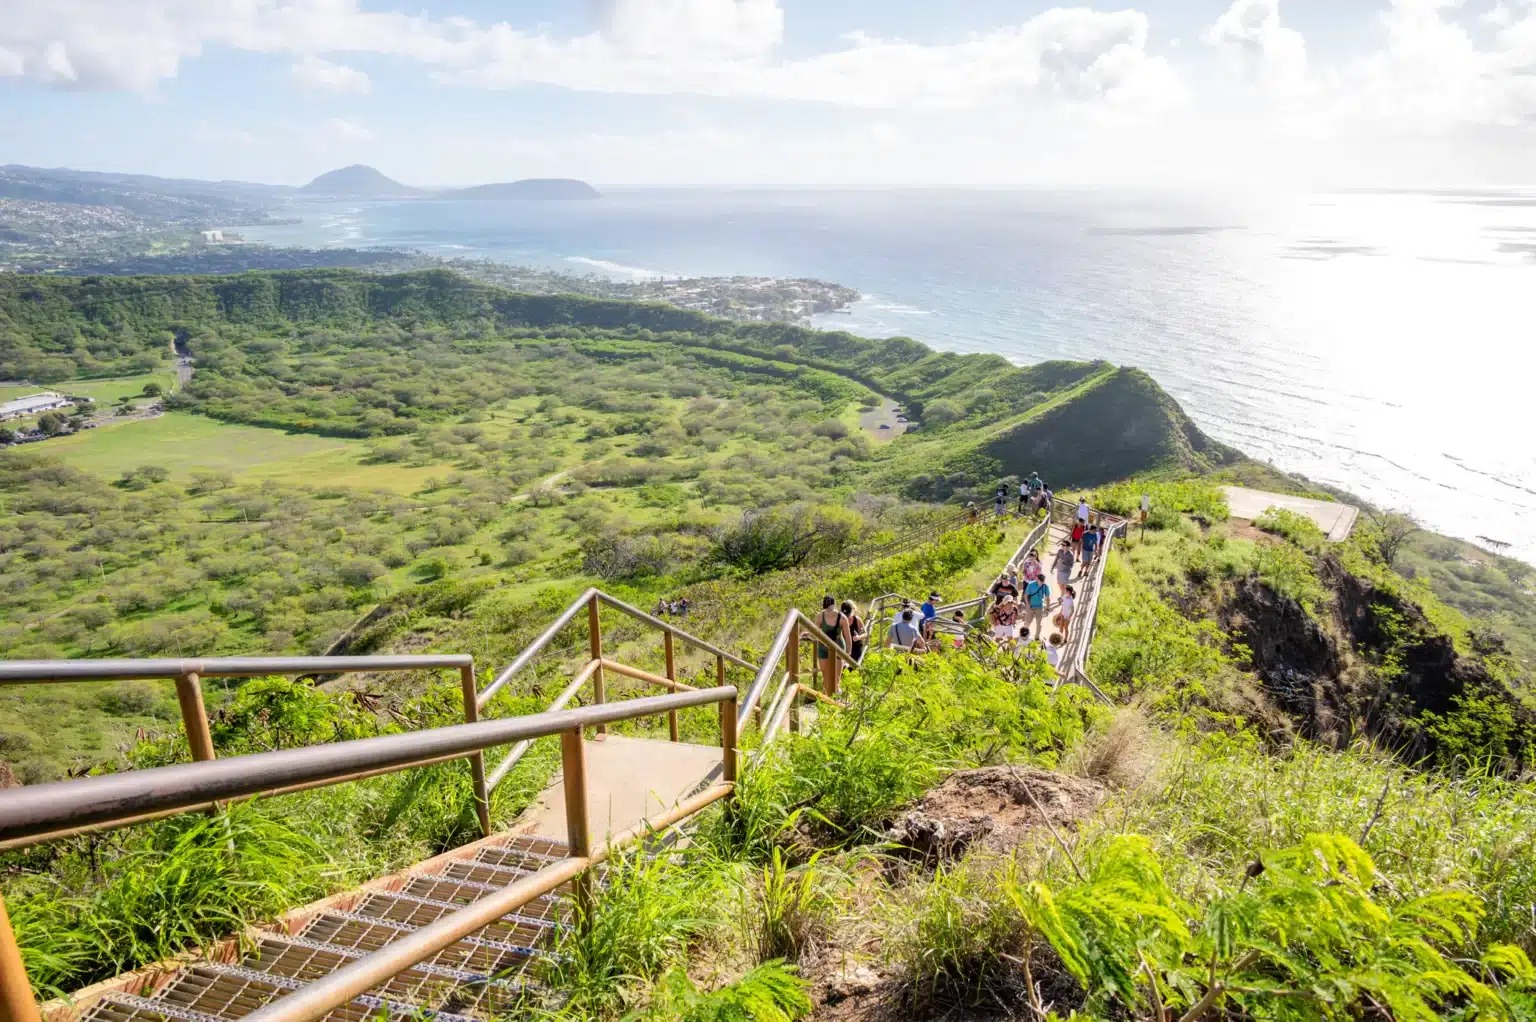 Diamond Head Summit Trail: Hiking Trail Attraction in the town of Honolulu on Oahu